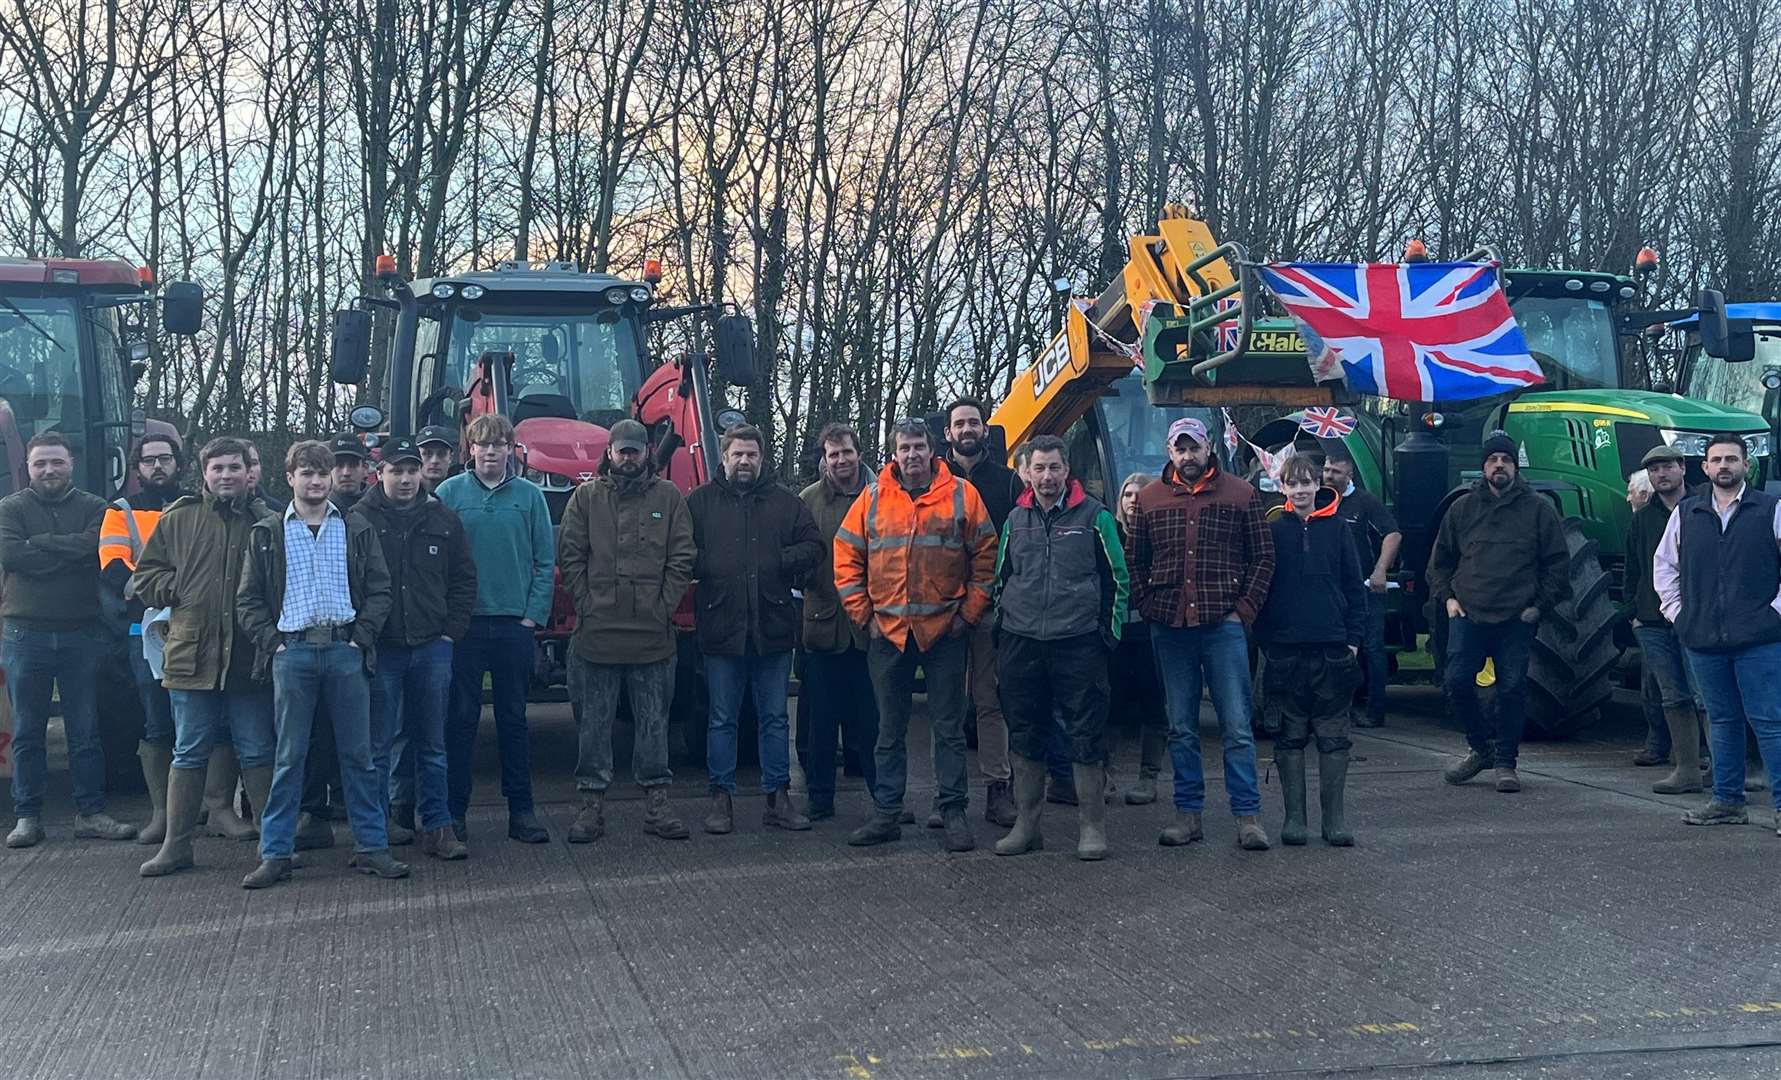 Farmers joined together in Ashford today to protest over unfair treatment and cheap imports